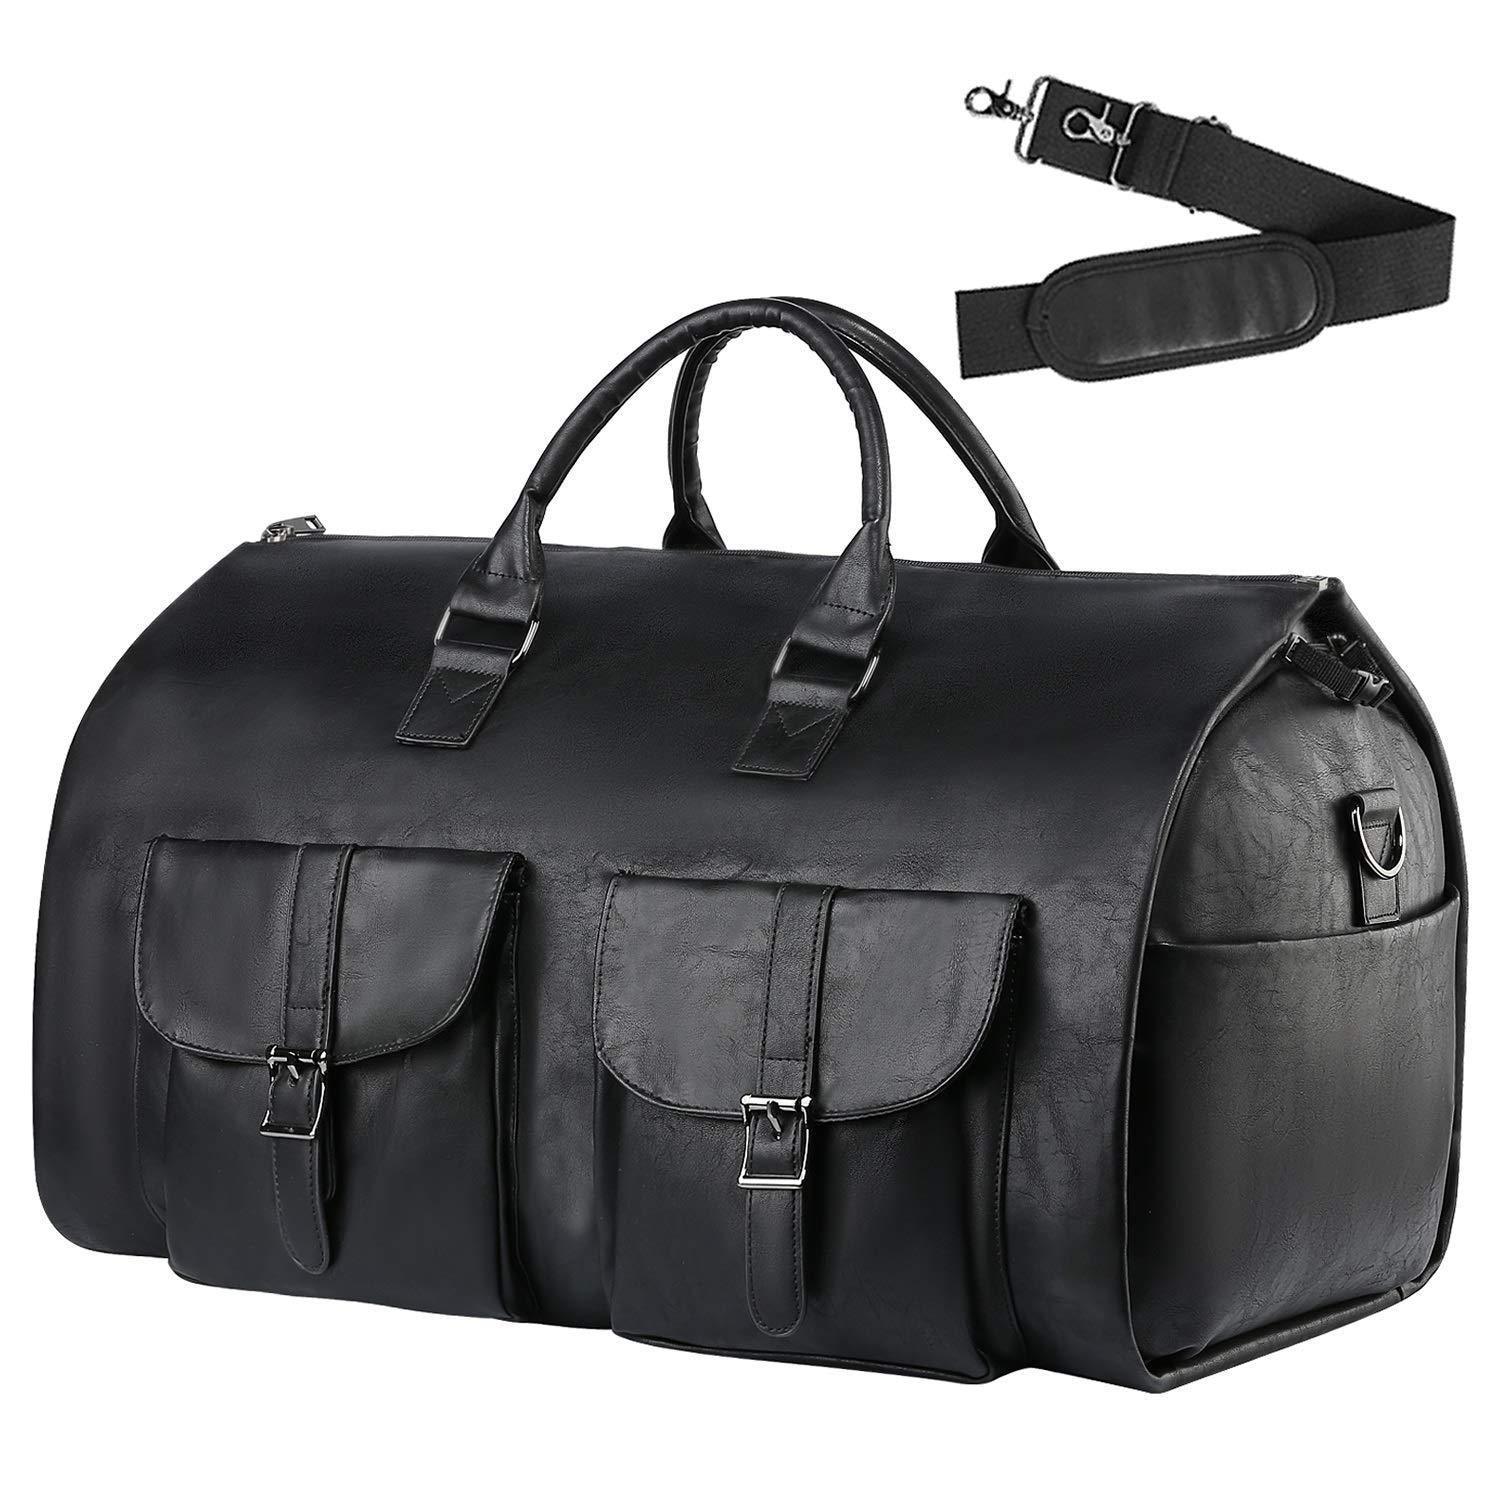 The Convertible Duffle Garment Bag - Leather - Black - CozyBuys